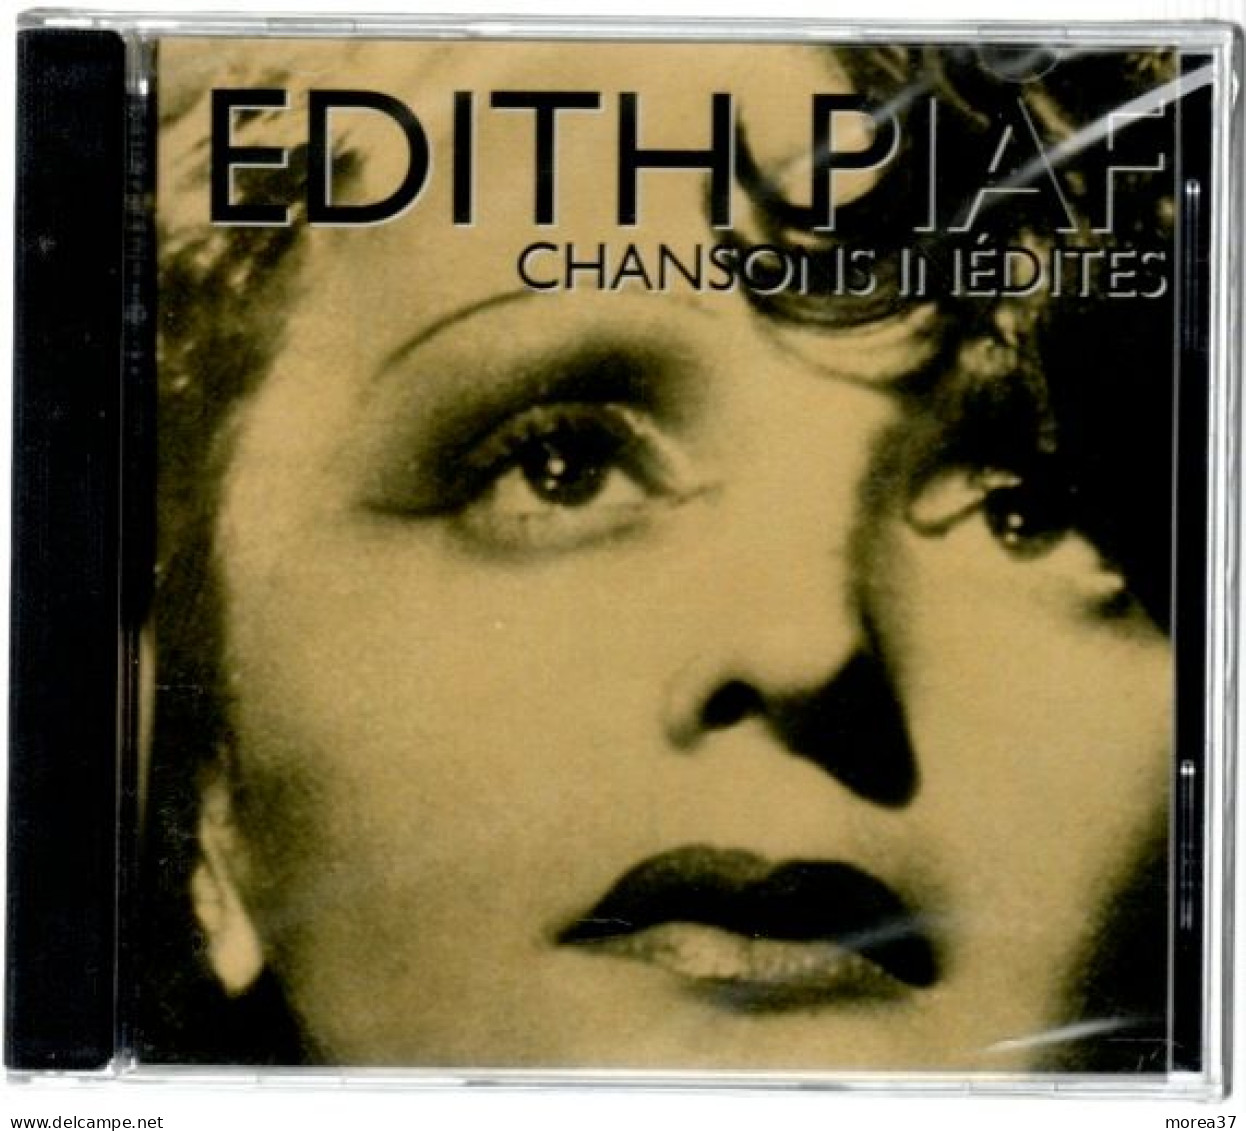 EDITH PIAF  Chansons Inédites    Neuf Sous Blister    (C02) - Other - French Music